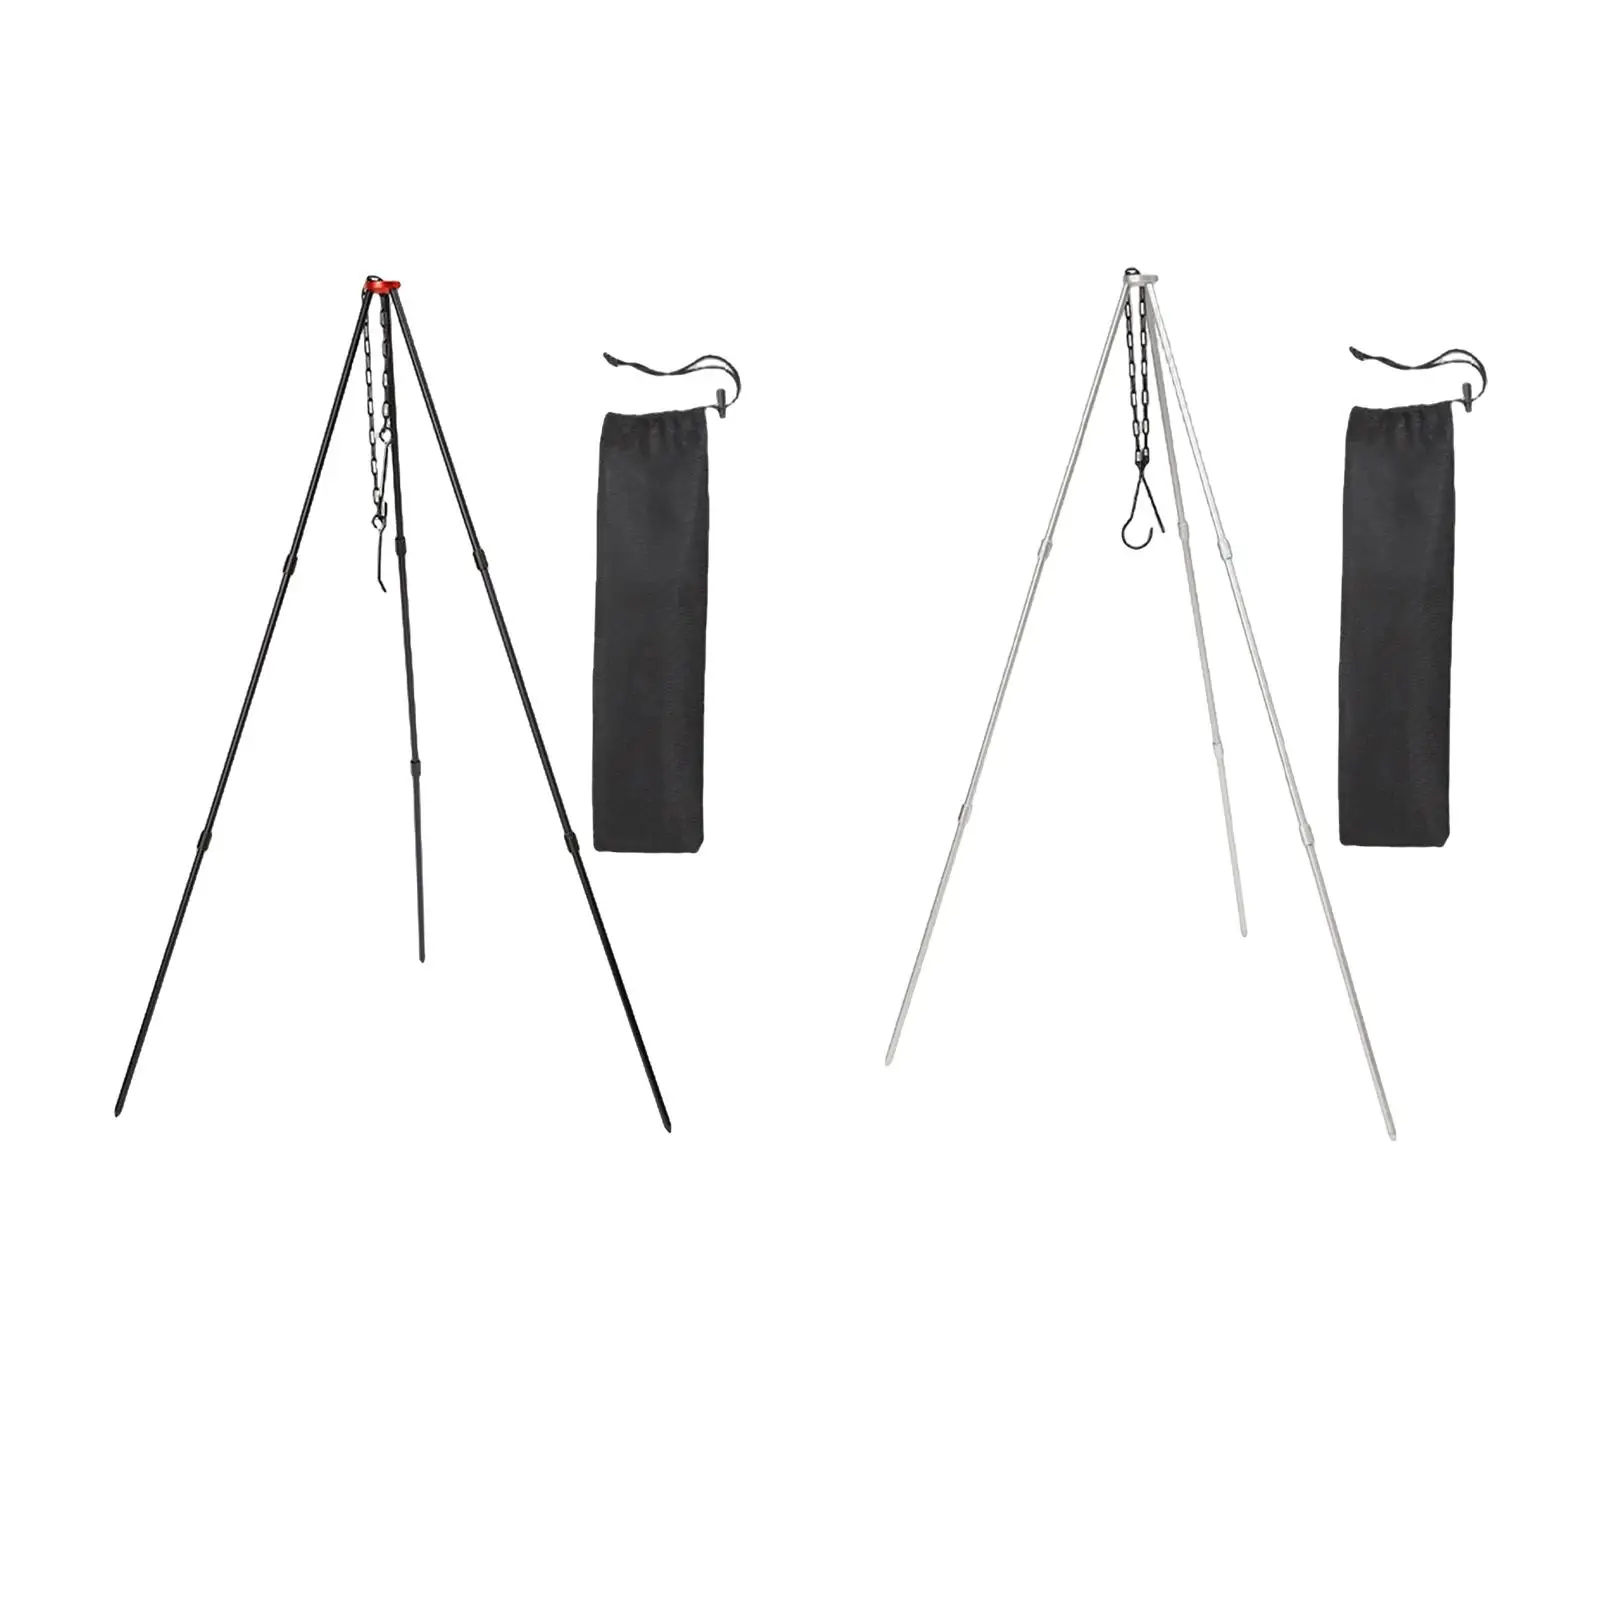 Telescopic Tripod Grilling Set Portable Hanging Pot for Campfire Picnic BBQ Premium Portable Outdoor Cooking Tripod for Cooker